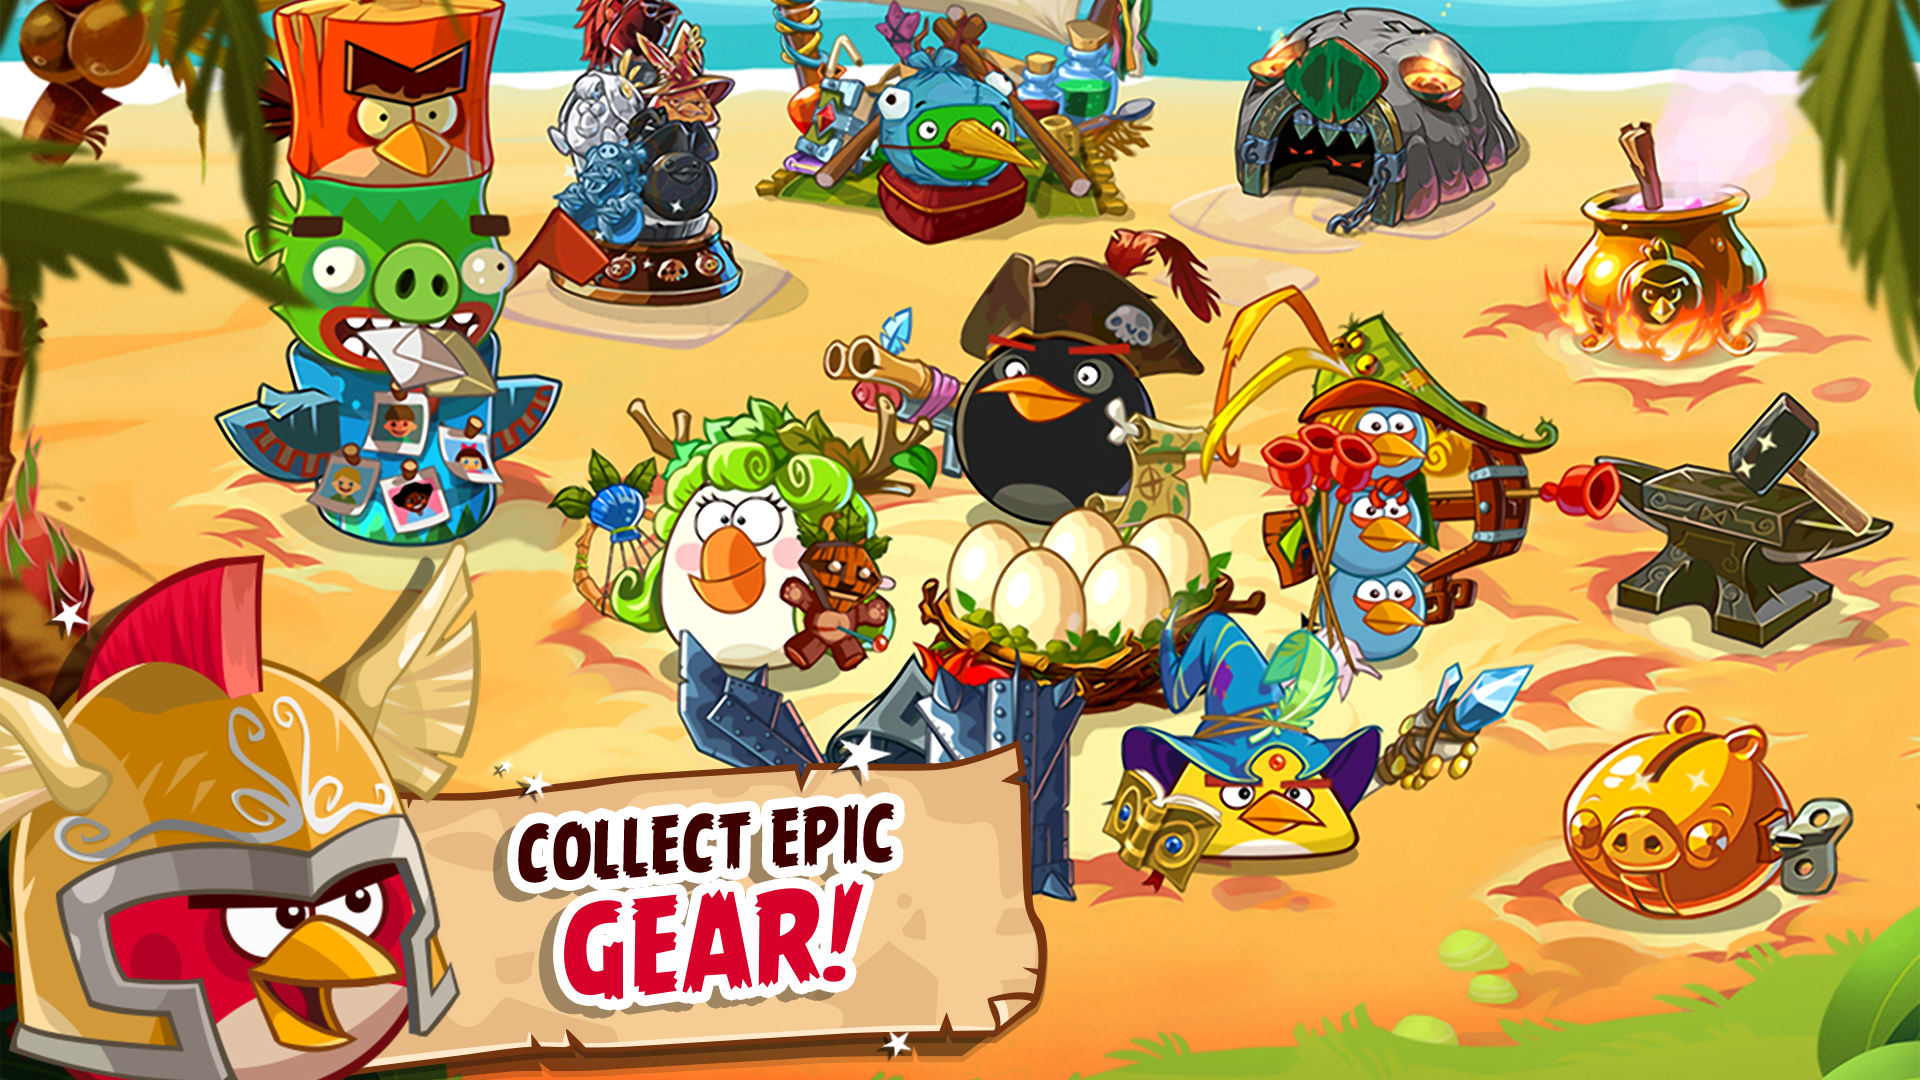 Download & Play Angry Birds Epic RPG on PC & Mac (Emulator)